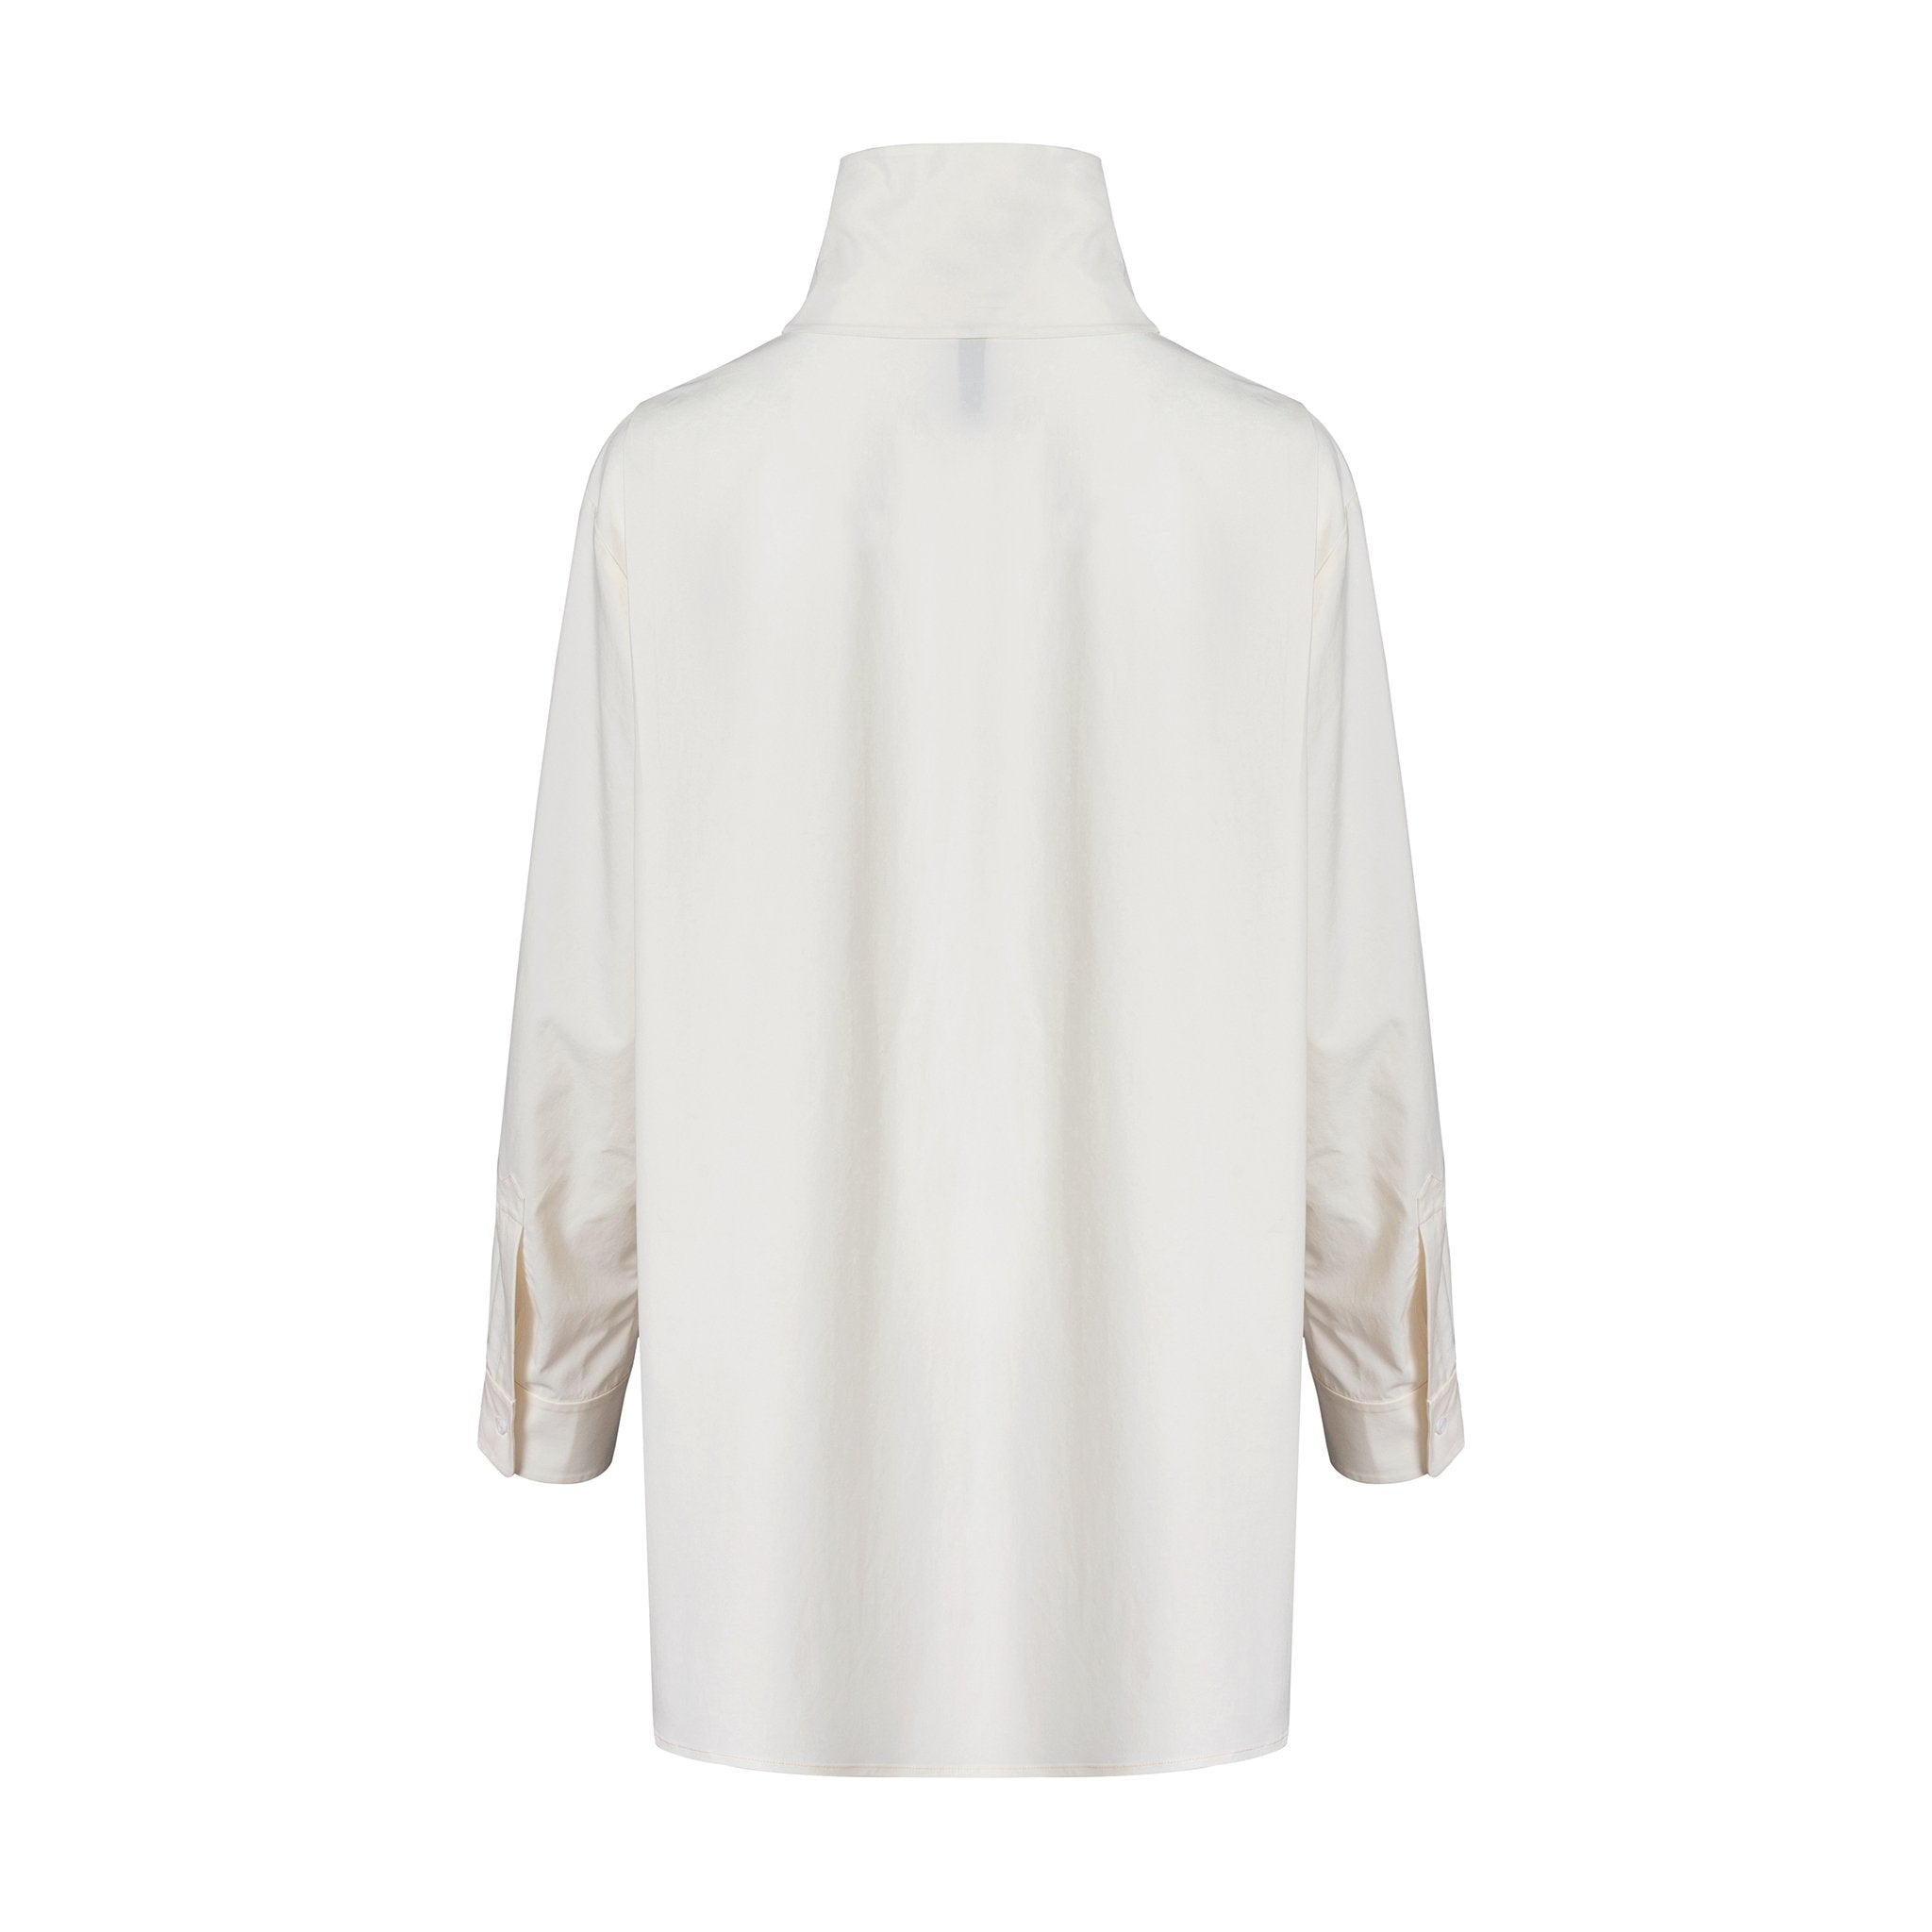 Ther. Asymmetric High-Necked Shirt | MADA IN CHINA